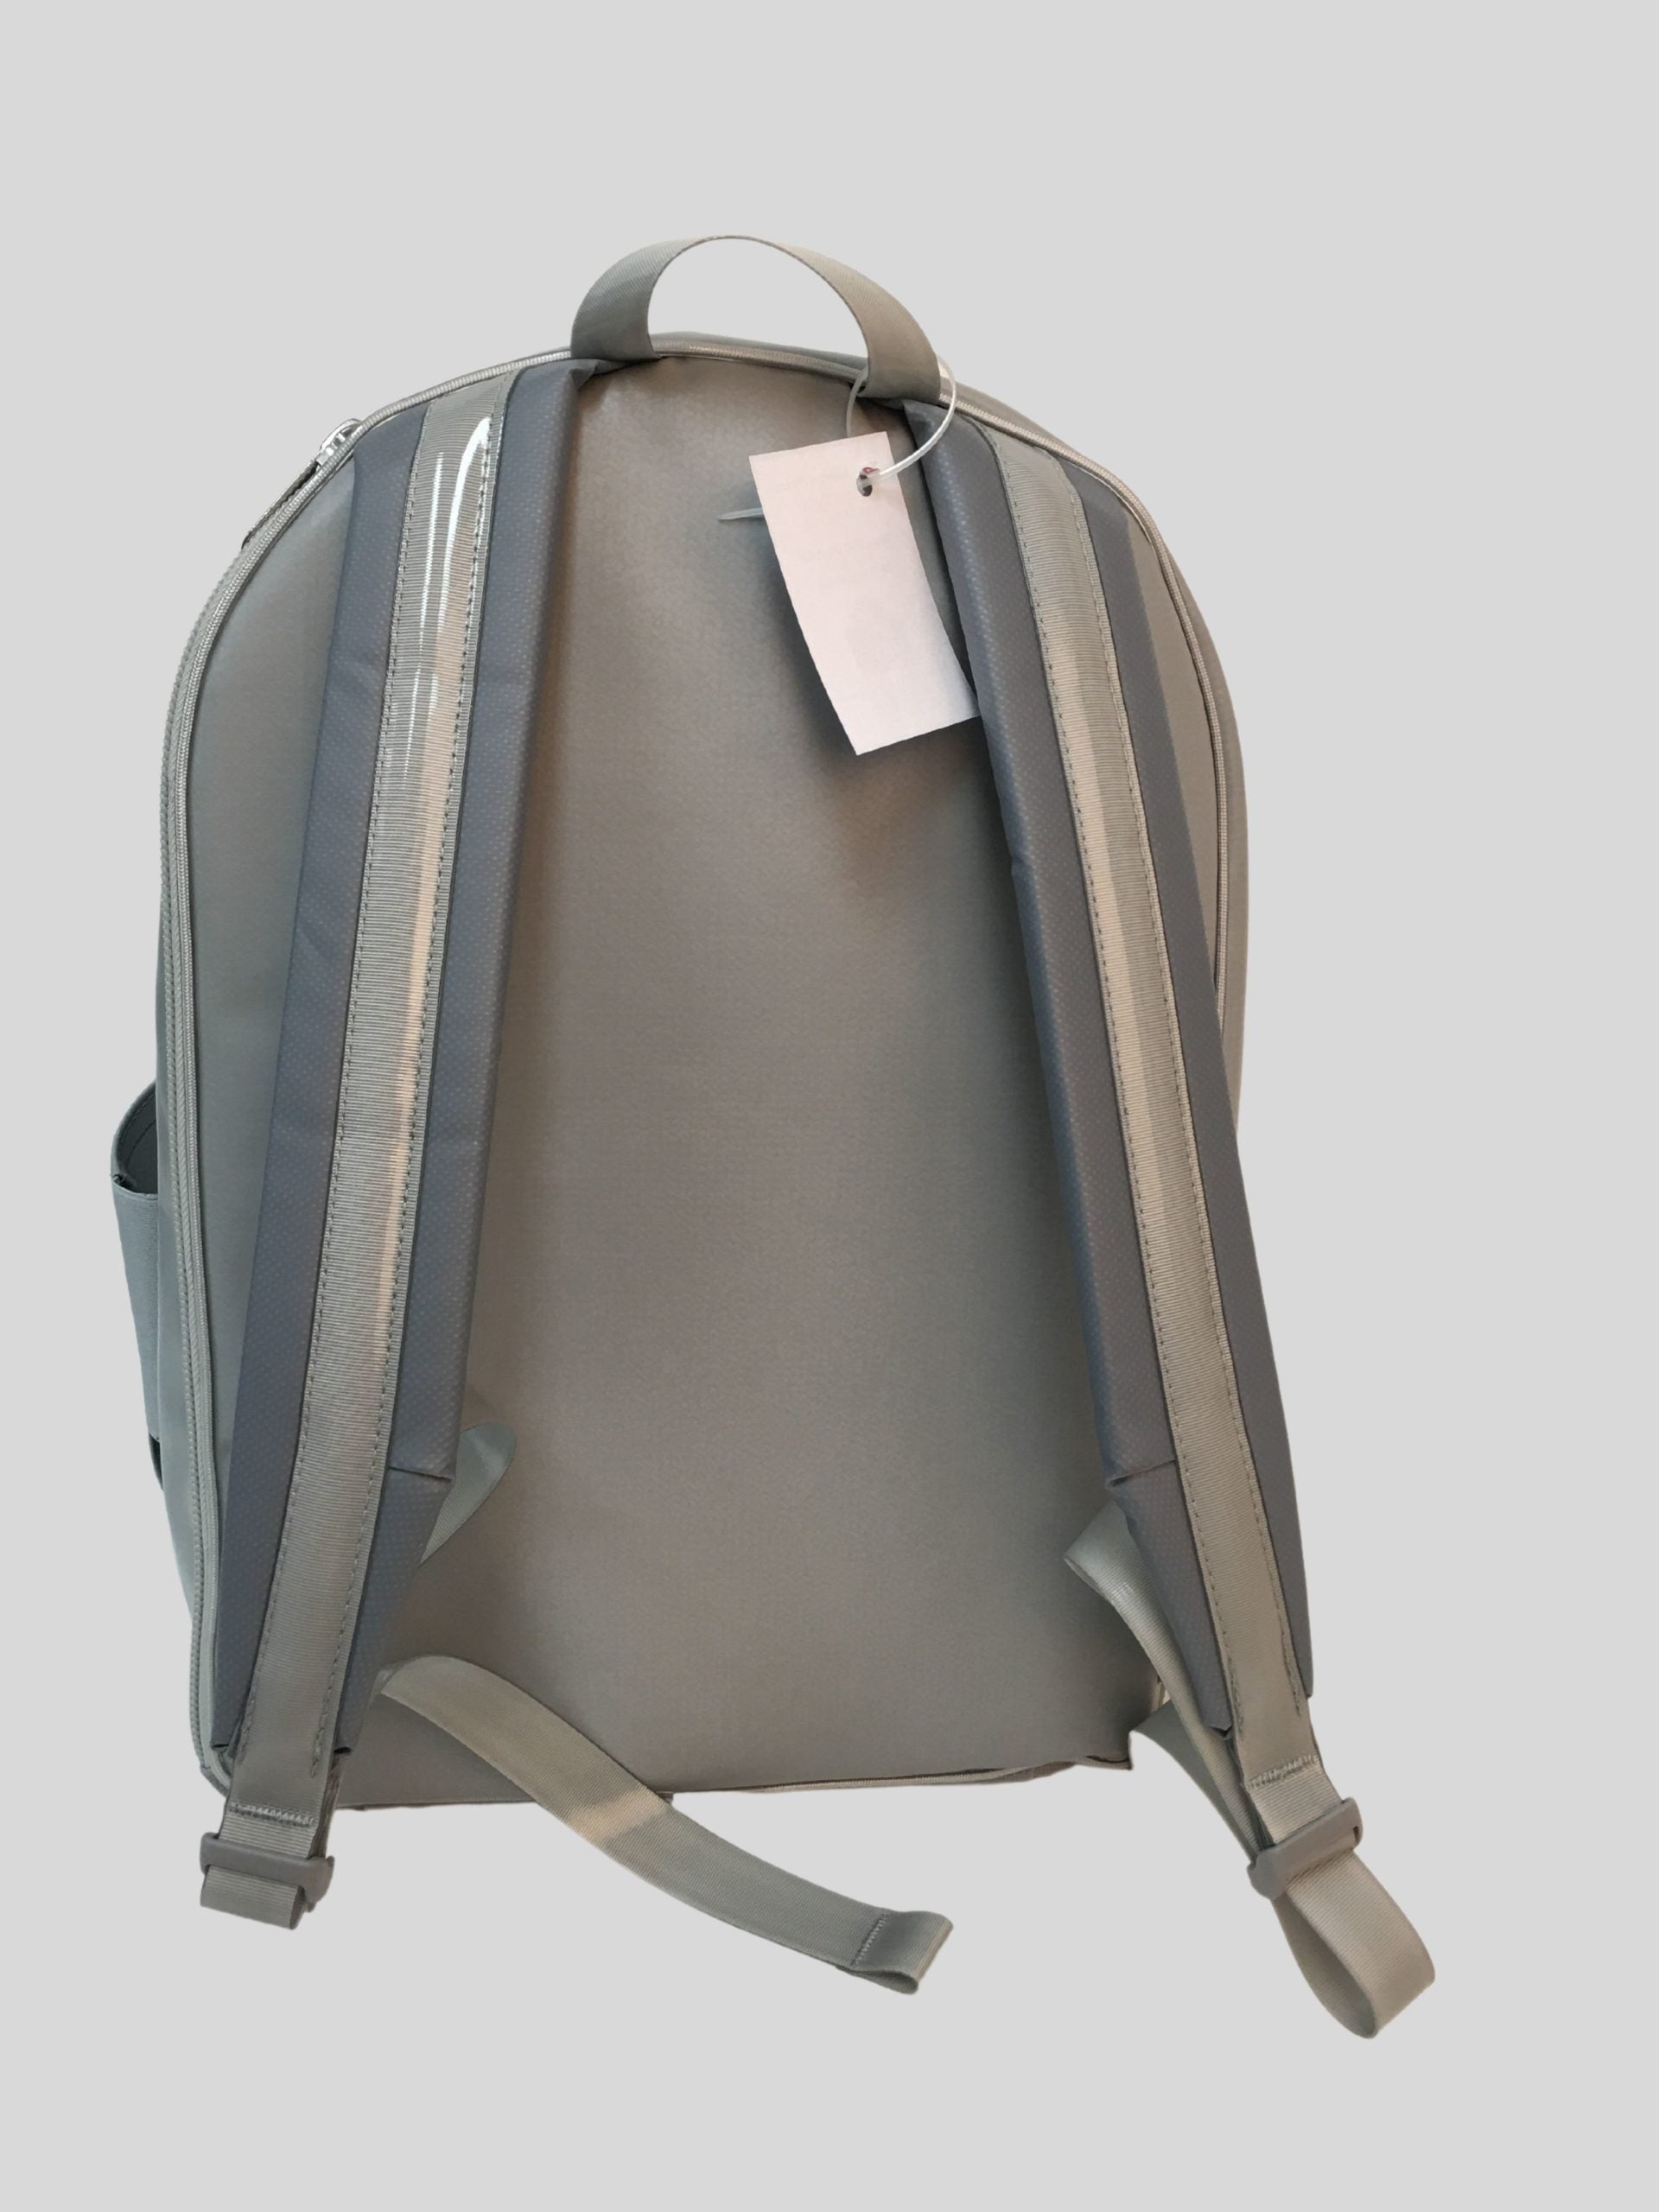 Neann FAB Firs Aid Backpack Bag Only - Grey